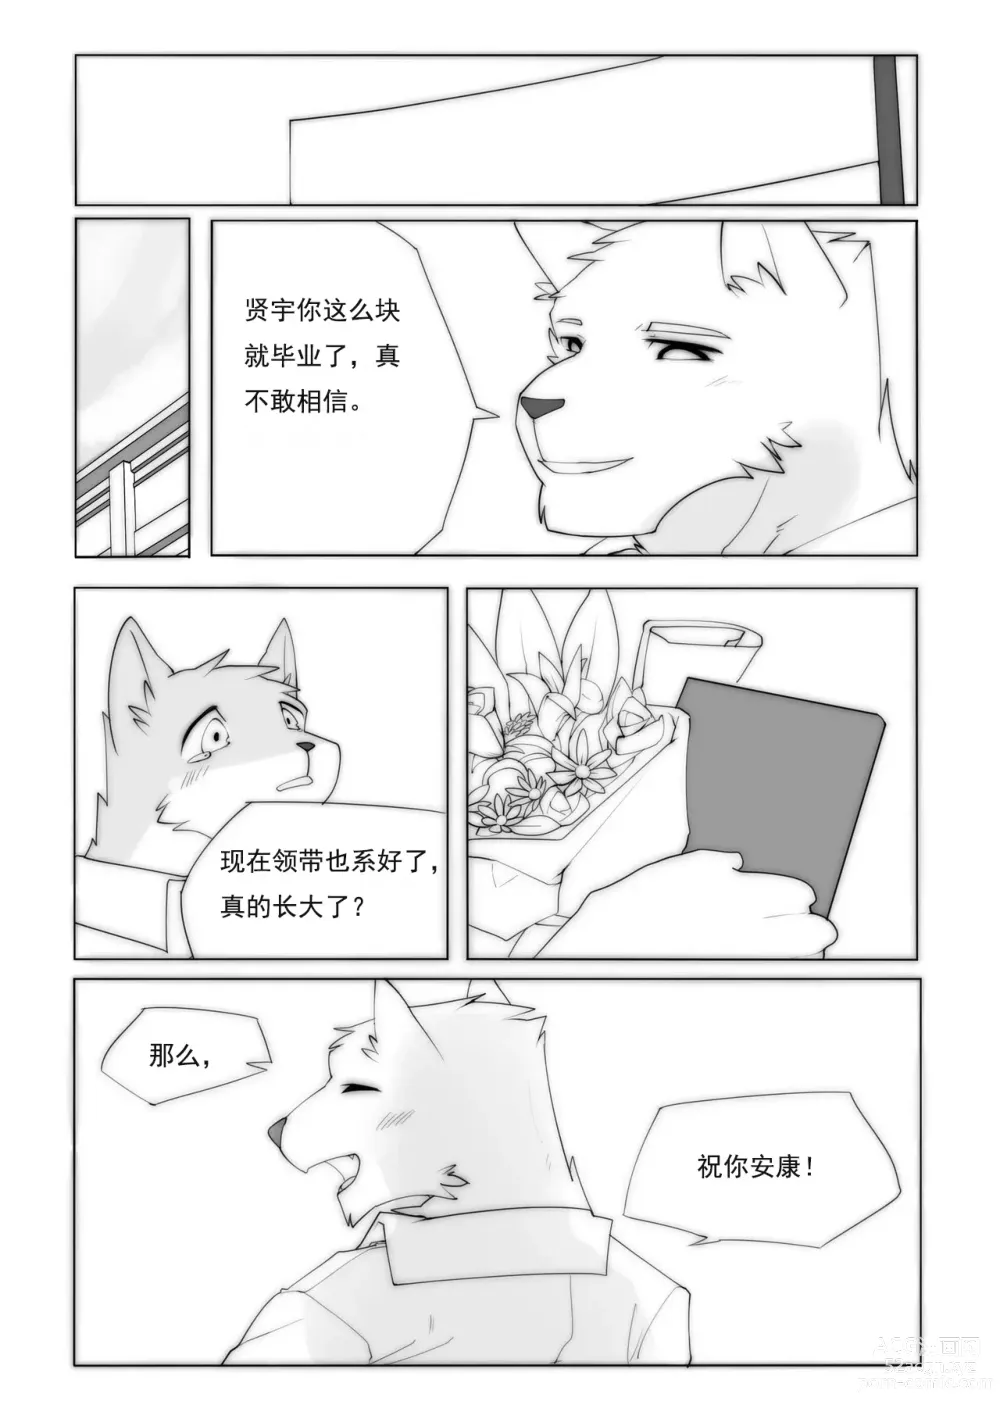 Page 30 of doujinshi 单恋 （工口译制）